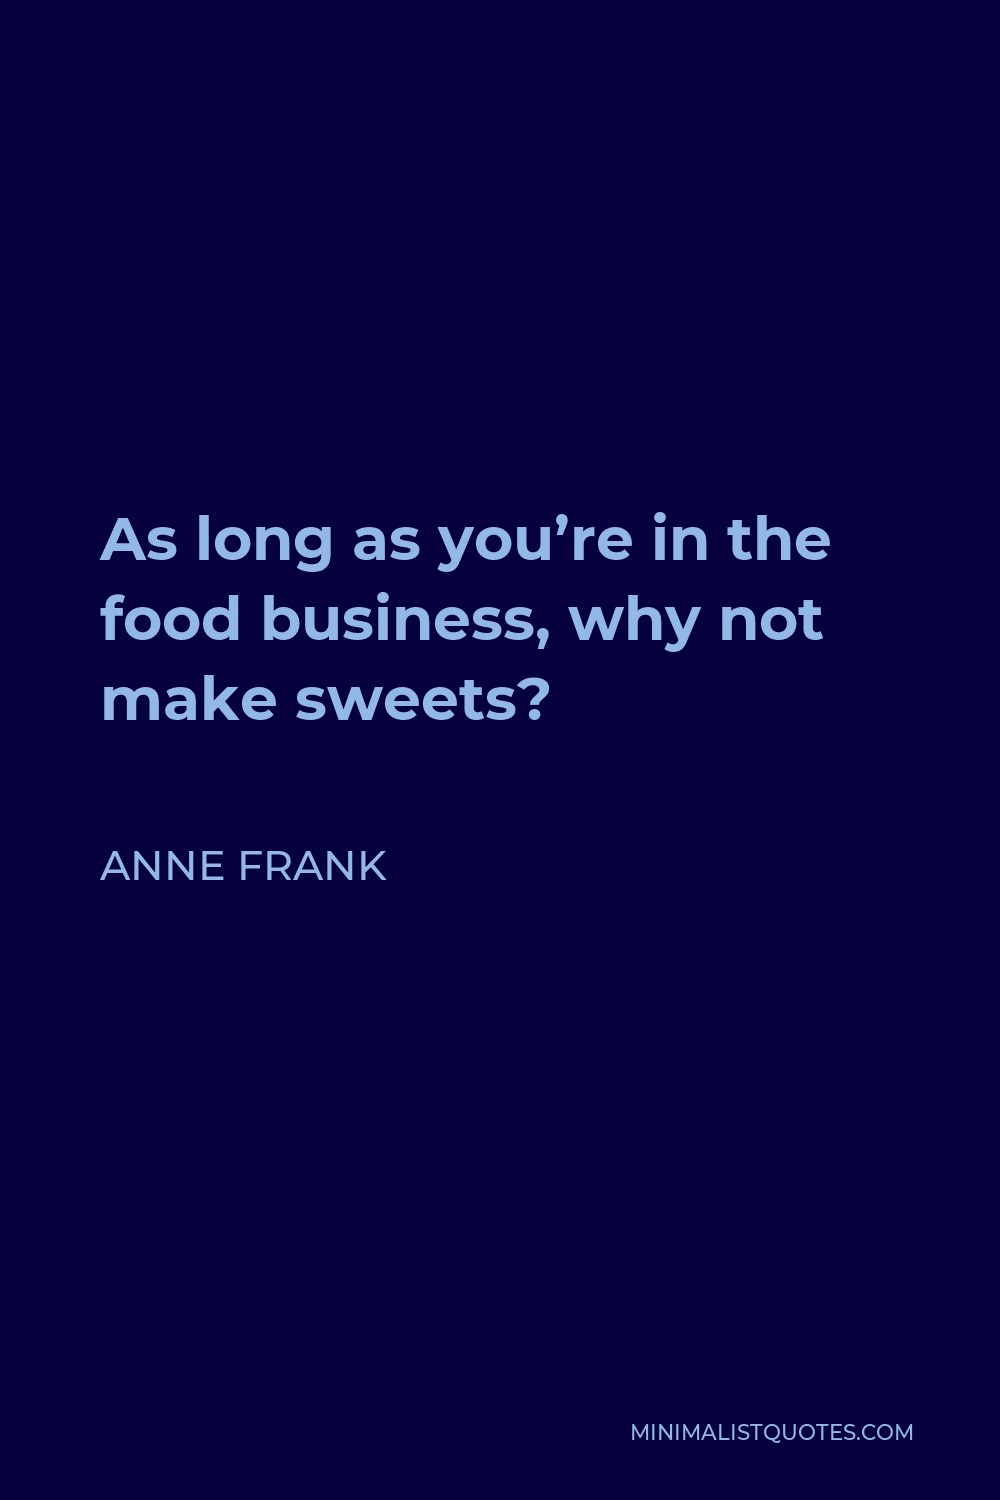 Anne Frank Quote - As long as you’re in the food business, why not make sweets?